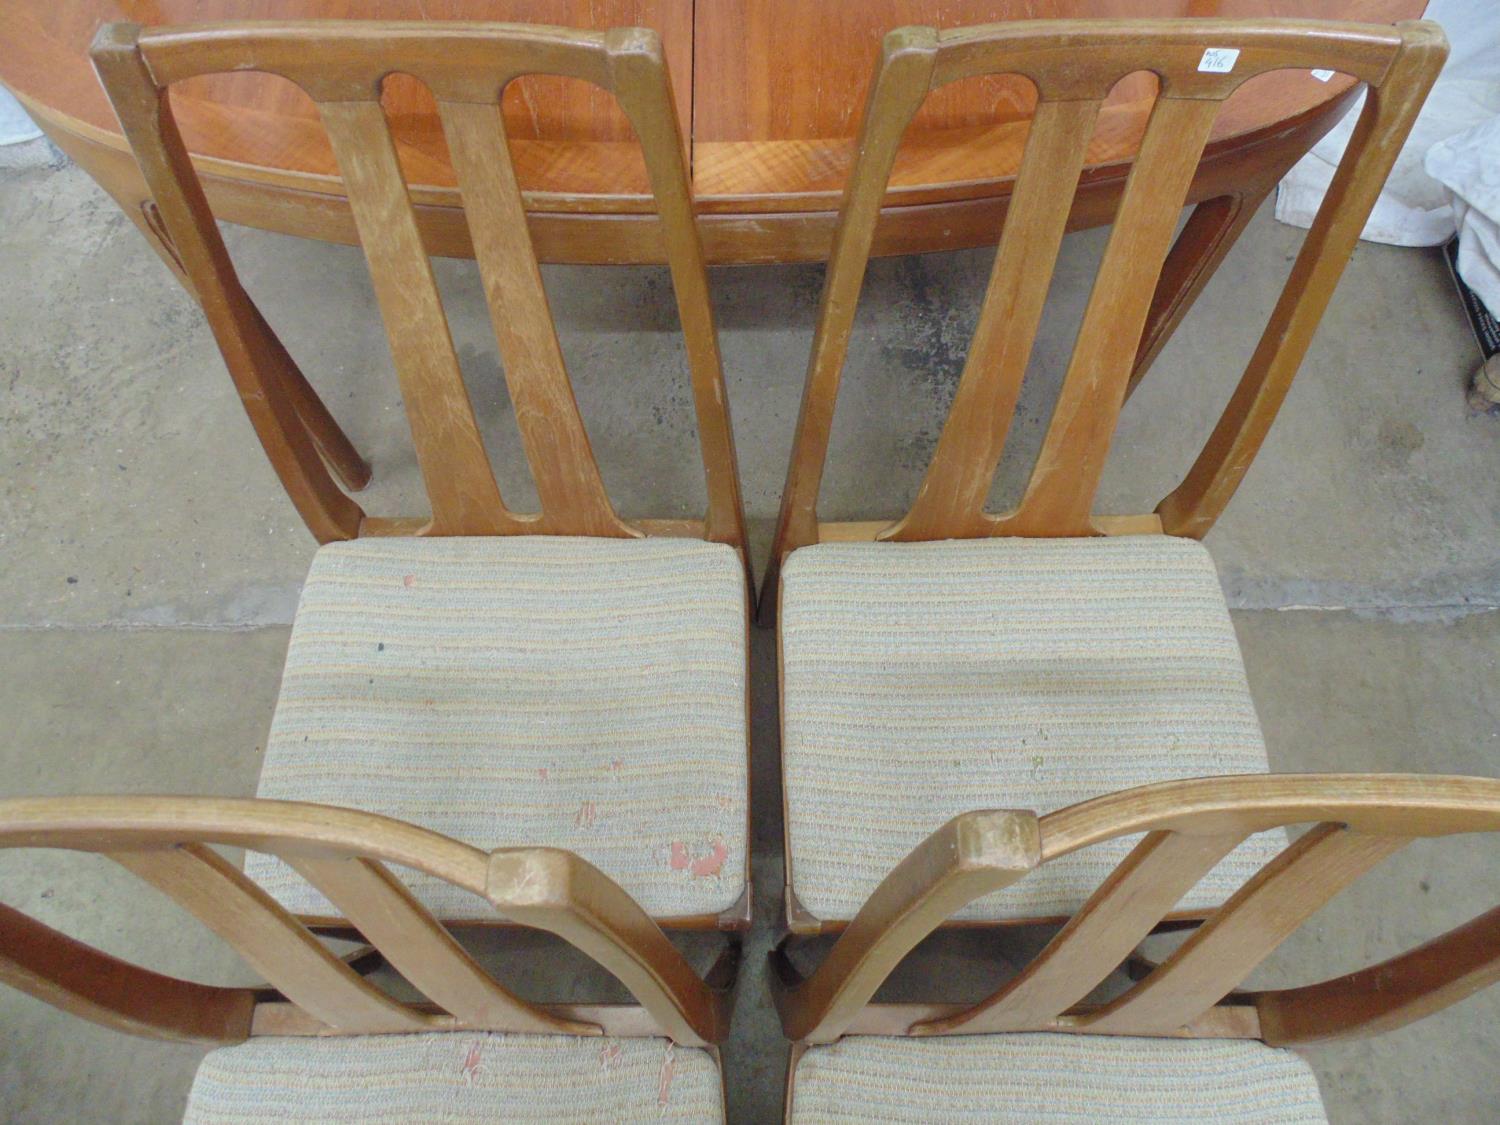 Set of six Nathan chairs (two carvers and four standard - one loose seat) - 47cm x 44cm x 96cm - Bild 4 aus 6